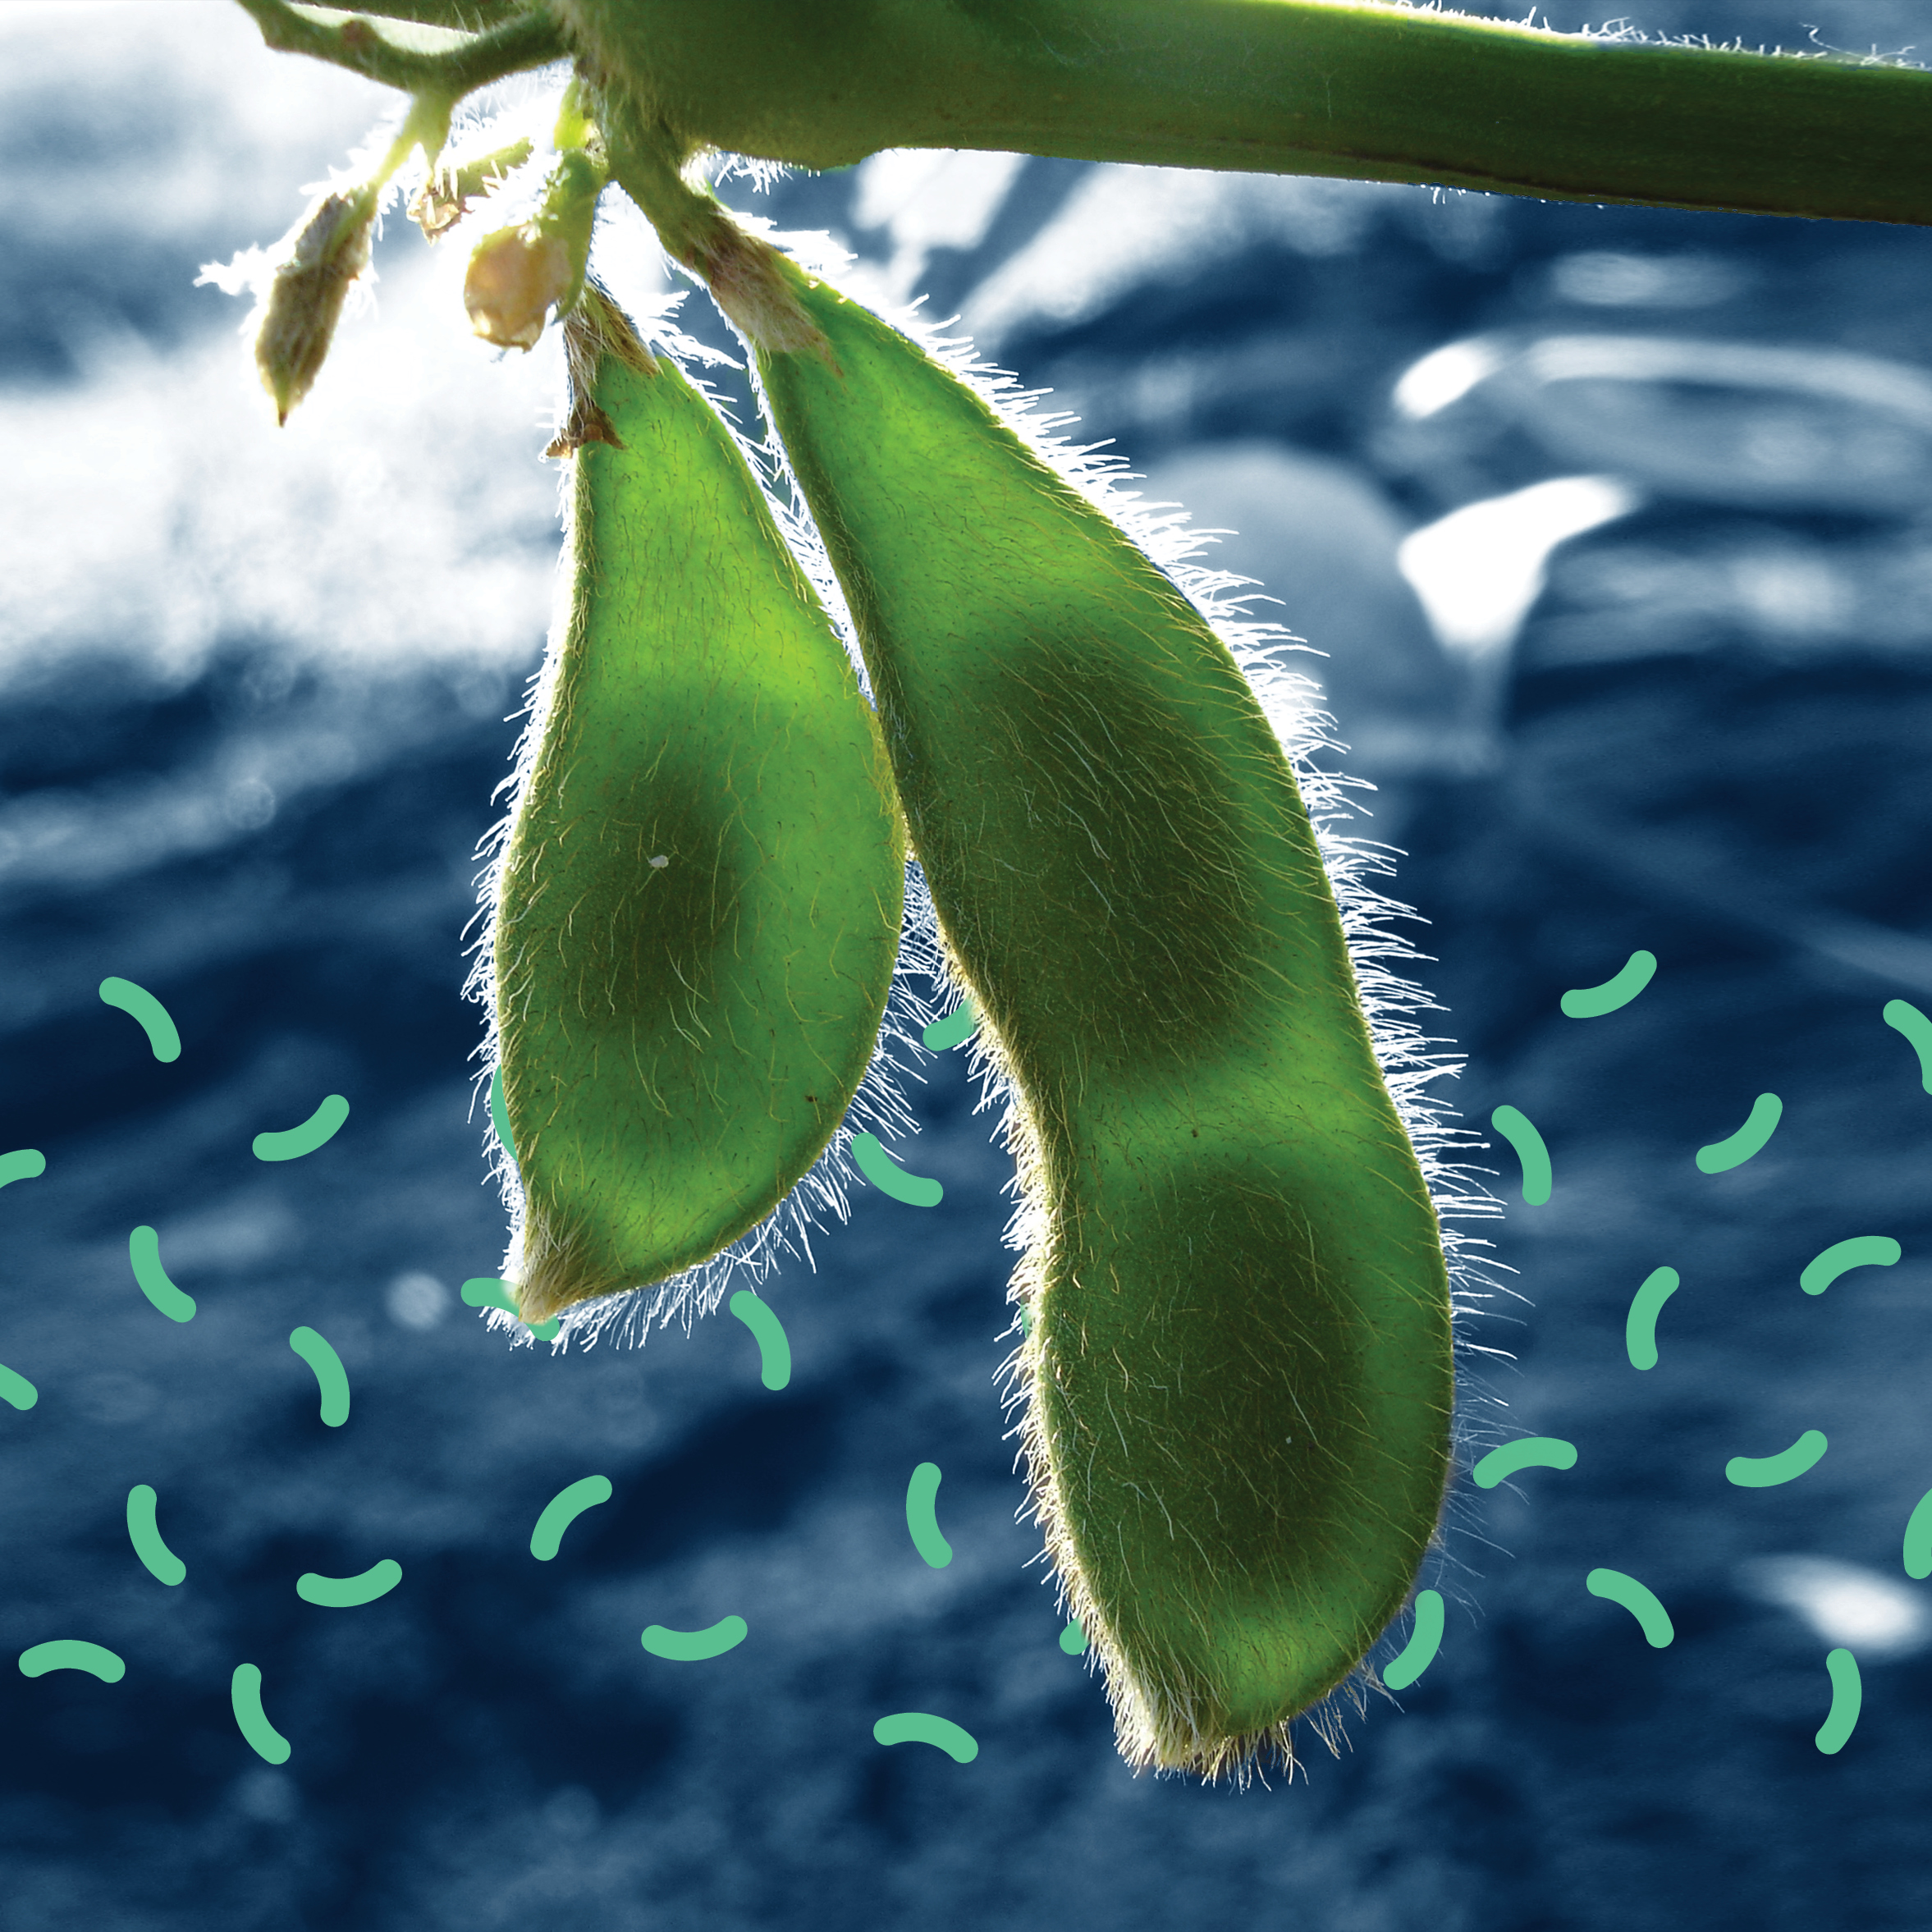 A tight shot of two bright green soybean pods hanging from a vine